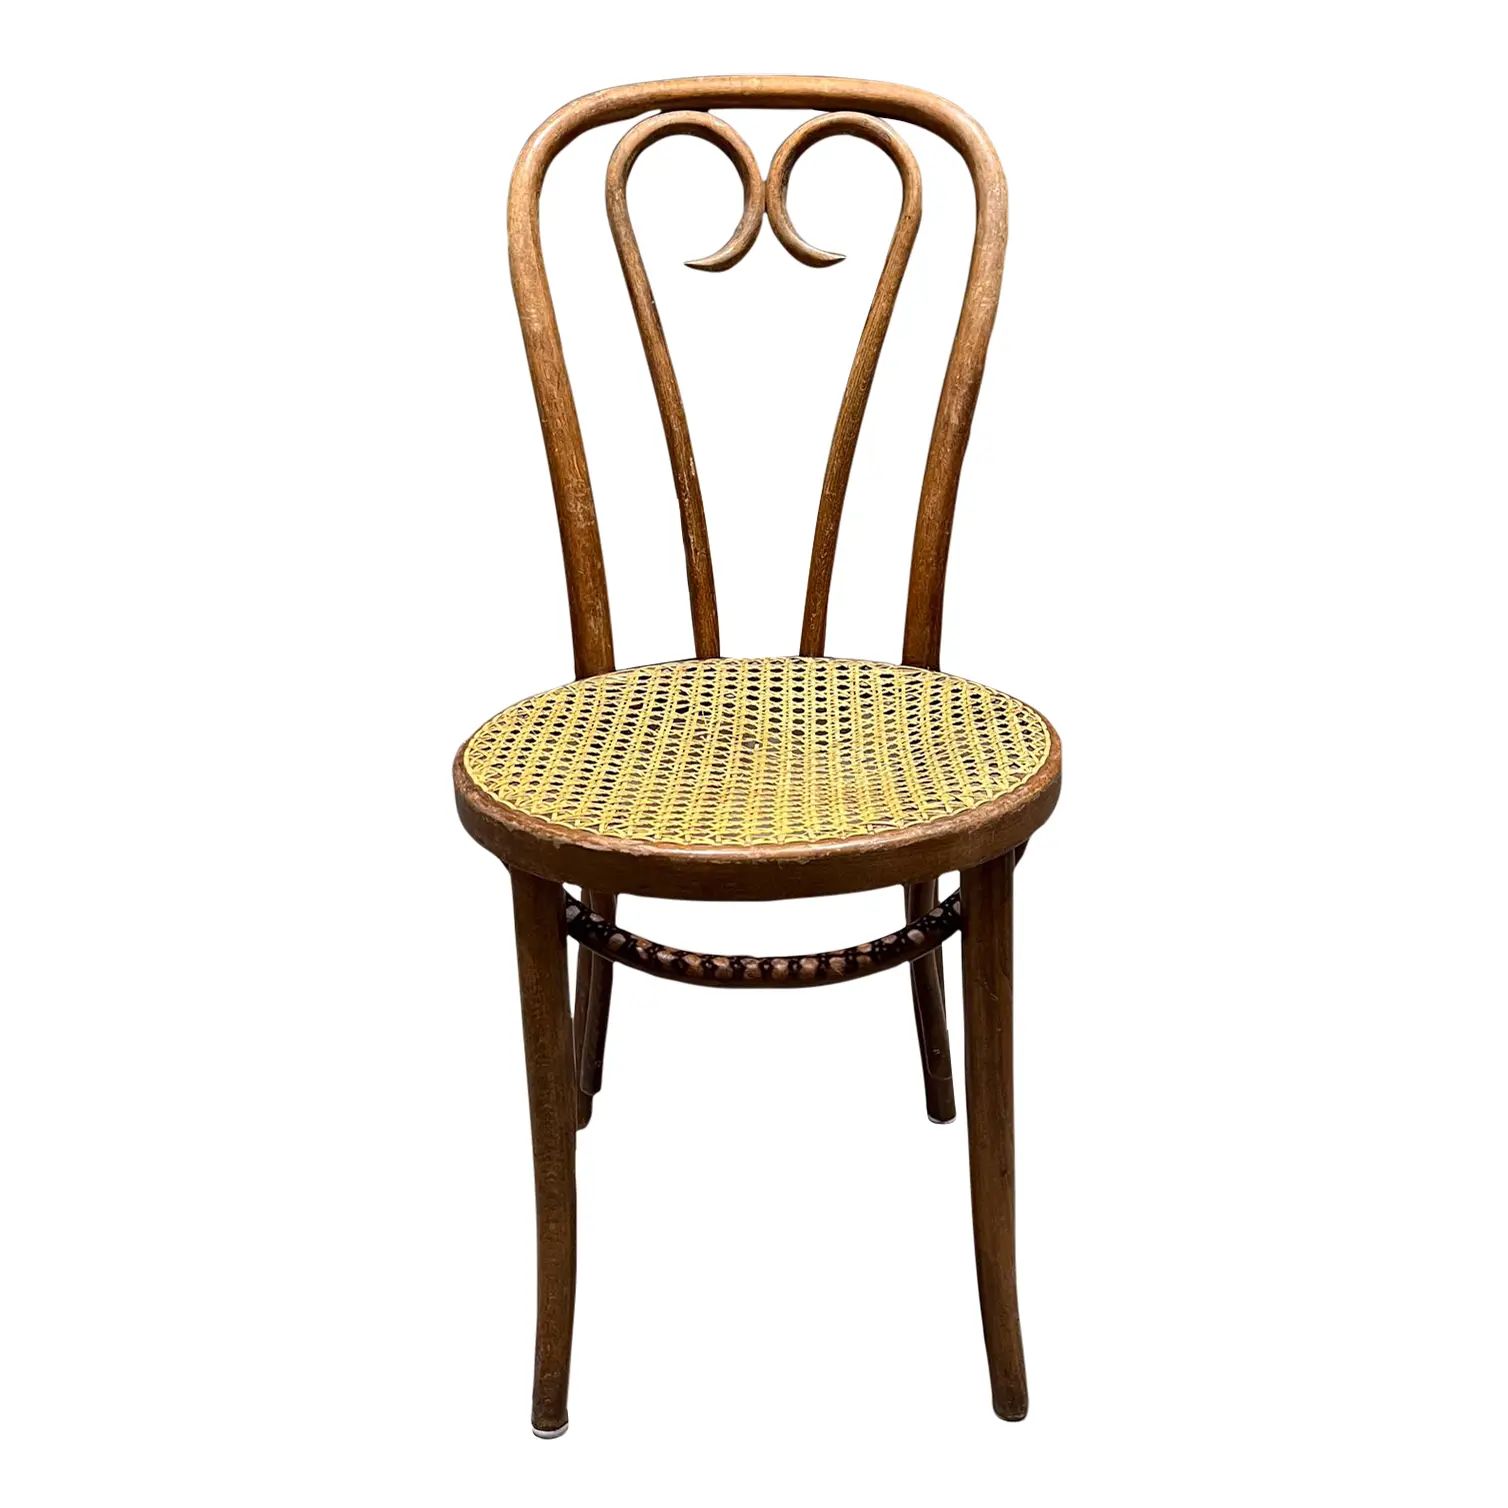 1960s Thonet A16 Sweetheart Chair Bentwood Cane | Chairish